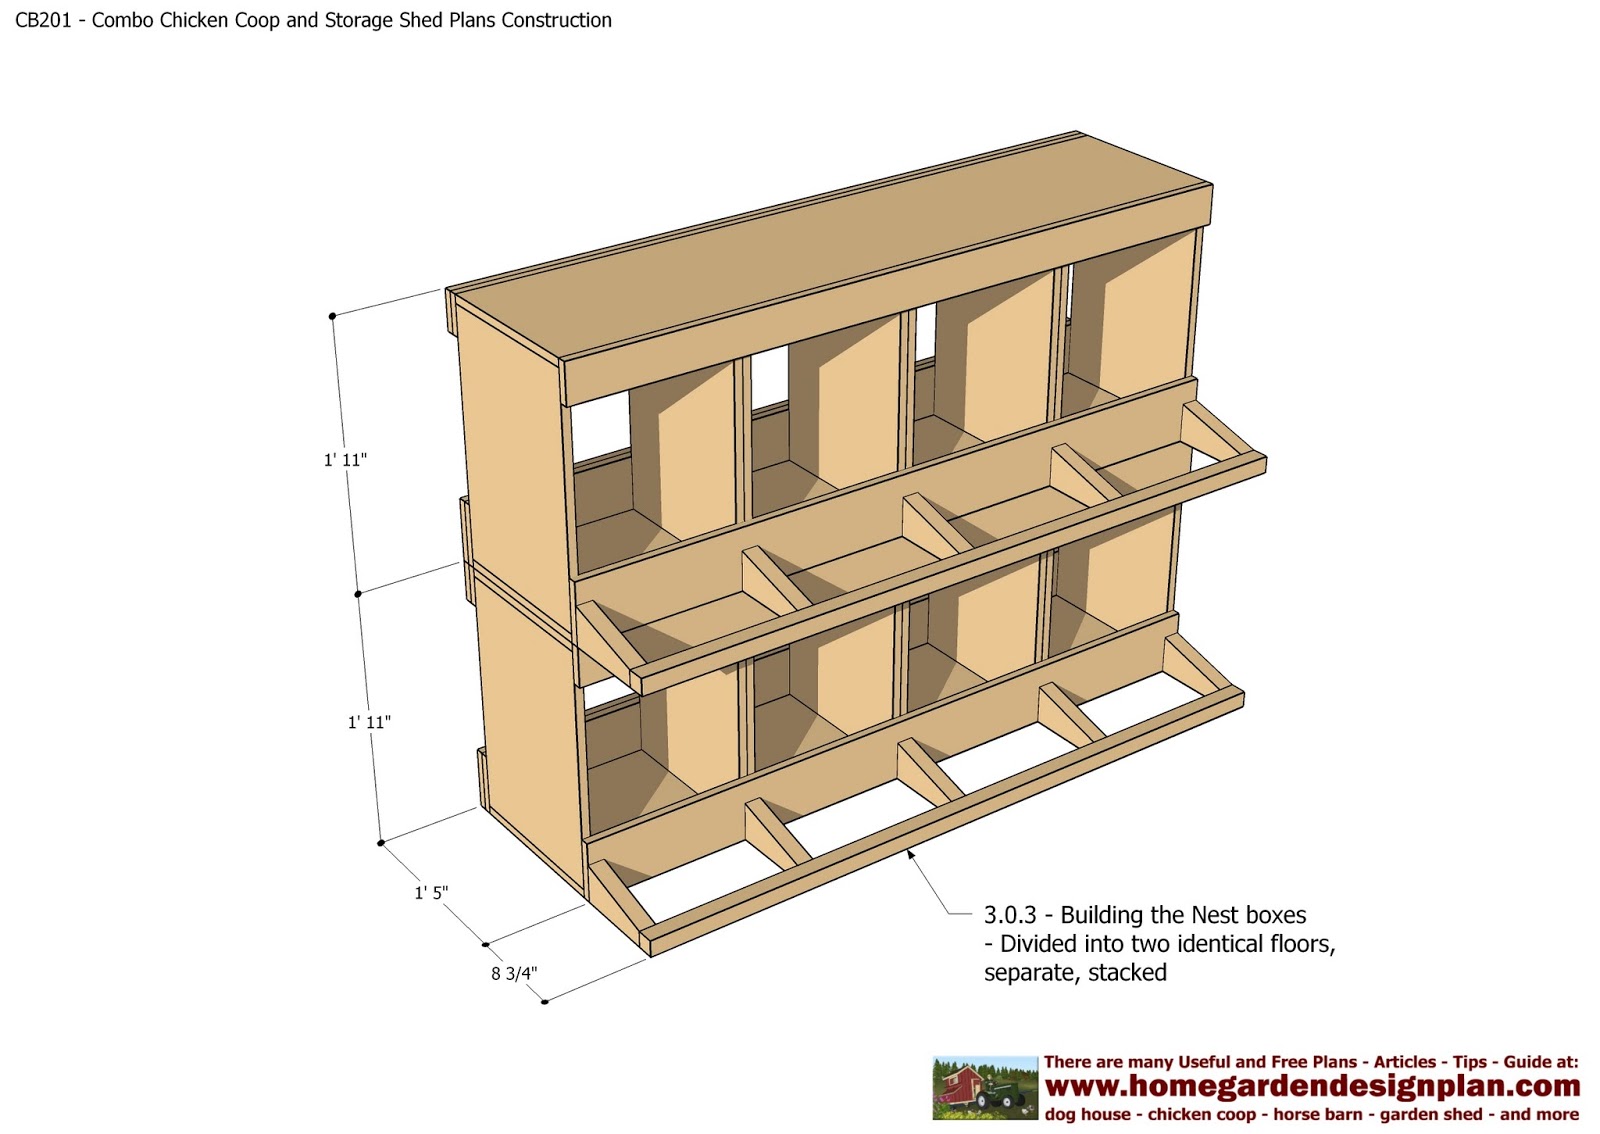 for chick coop: CB201 Combo Plans Chicken Coop Plans ...